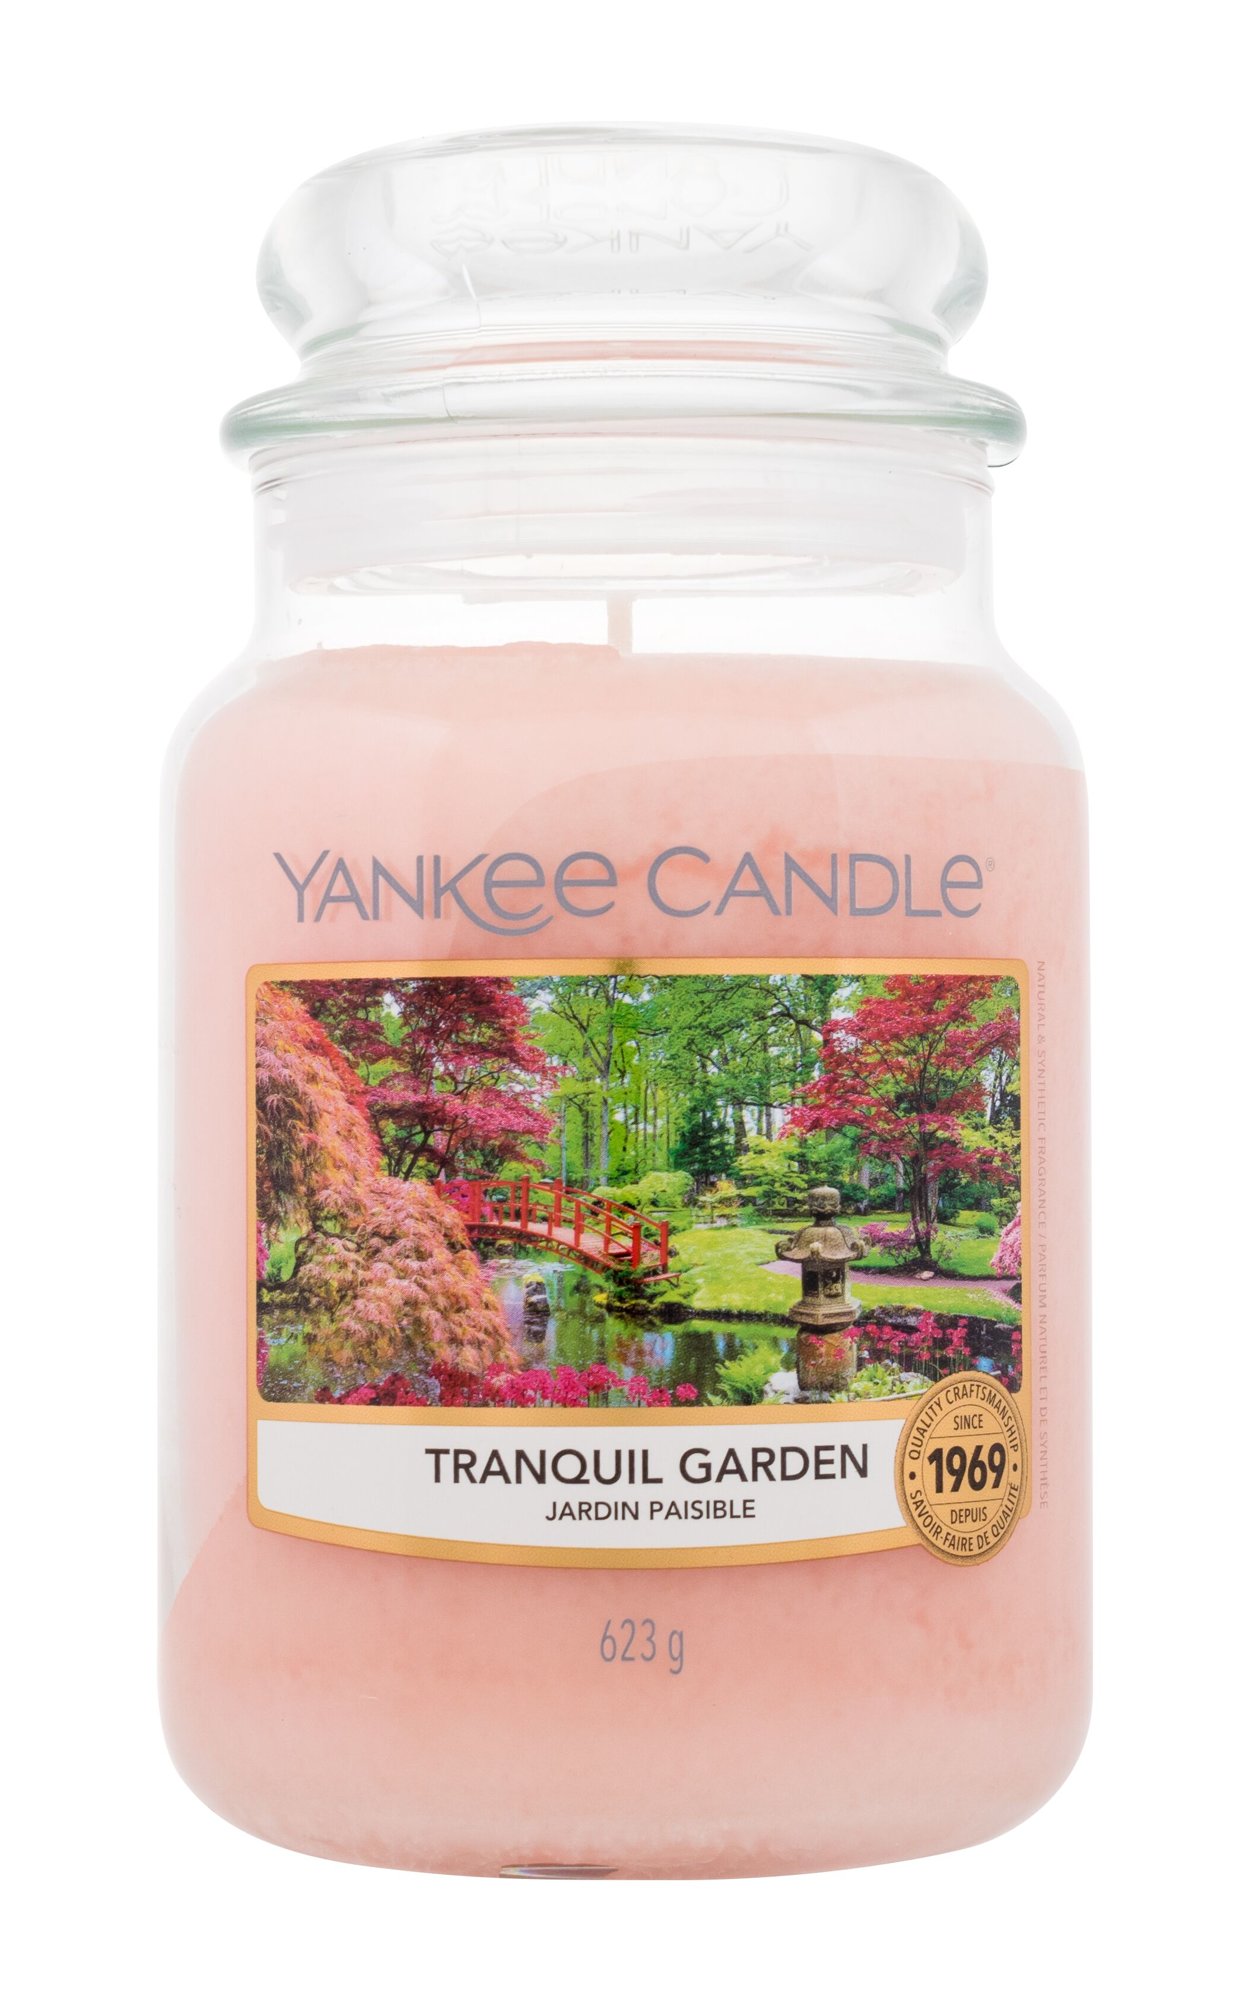 Yankee Candle Tranquil Garden 623g Kvepalai Unisex Scented Candle